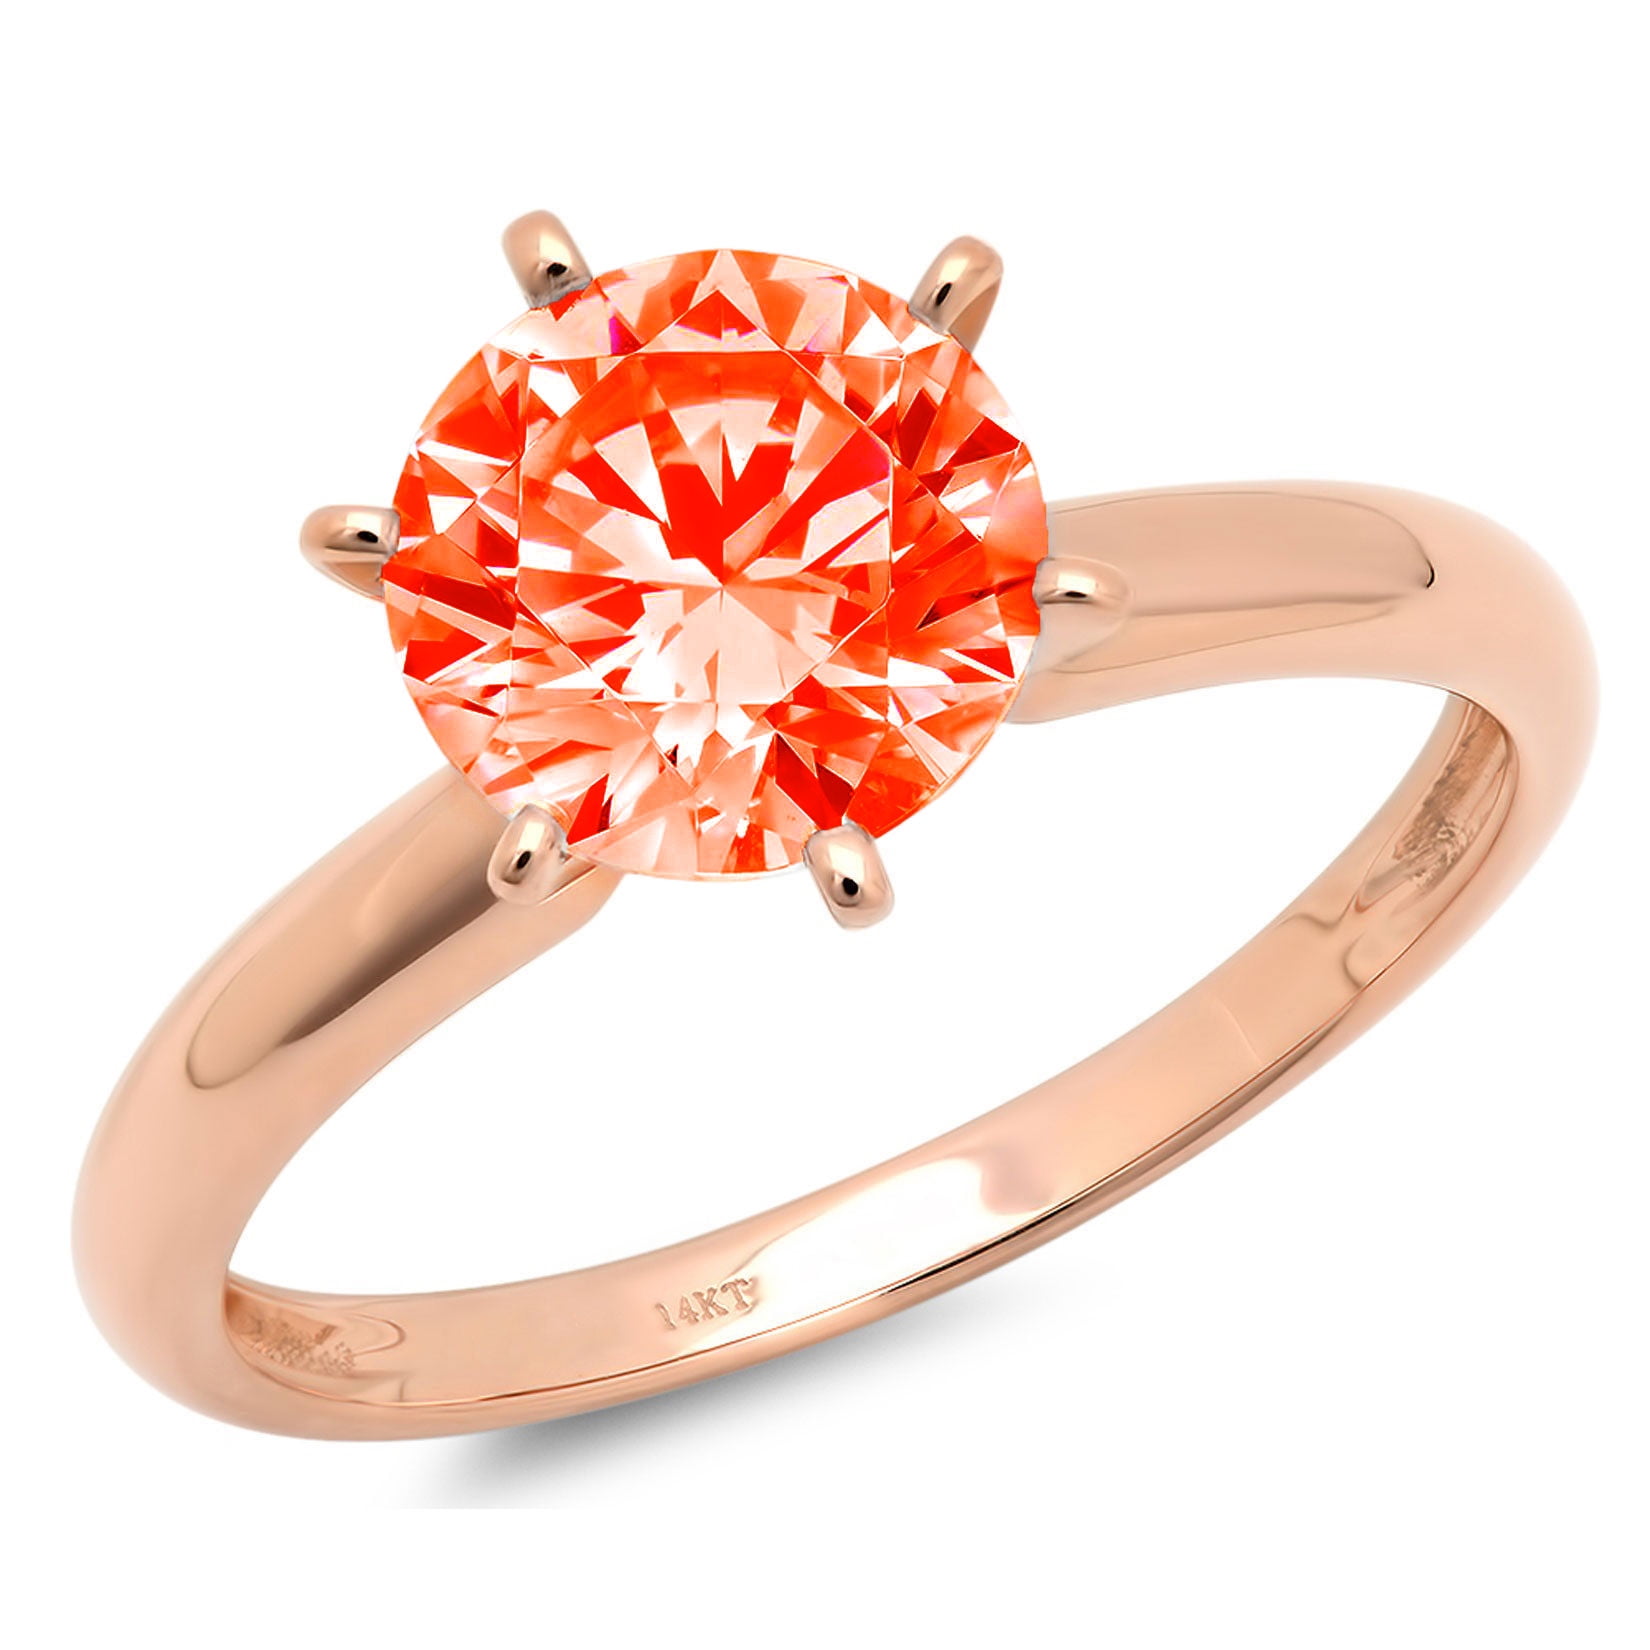 0.5ct Round Cut Red Simulated Diamond 18k Pink Rose Gold Engraving  Statement Anniversary Engagement Wedding Solitaire Ring Size 10 -  Walmart.com